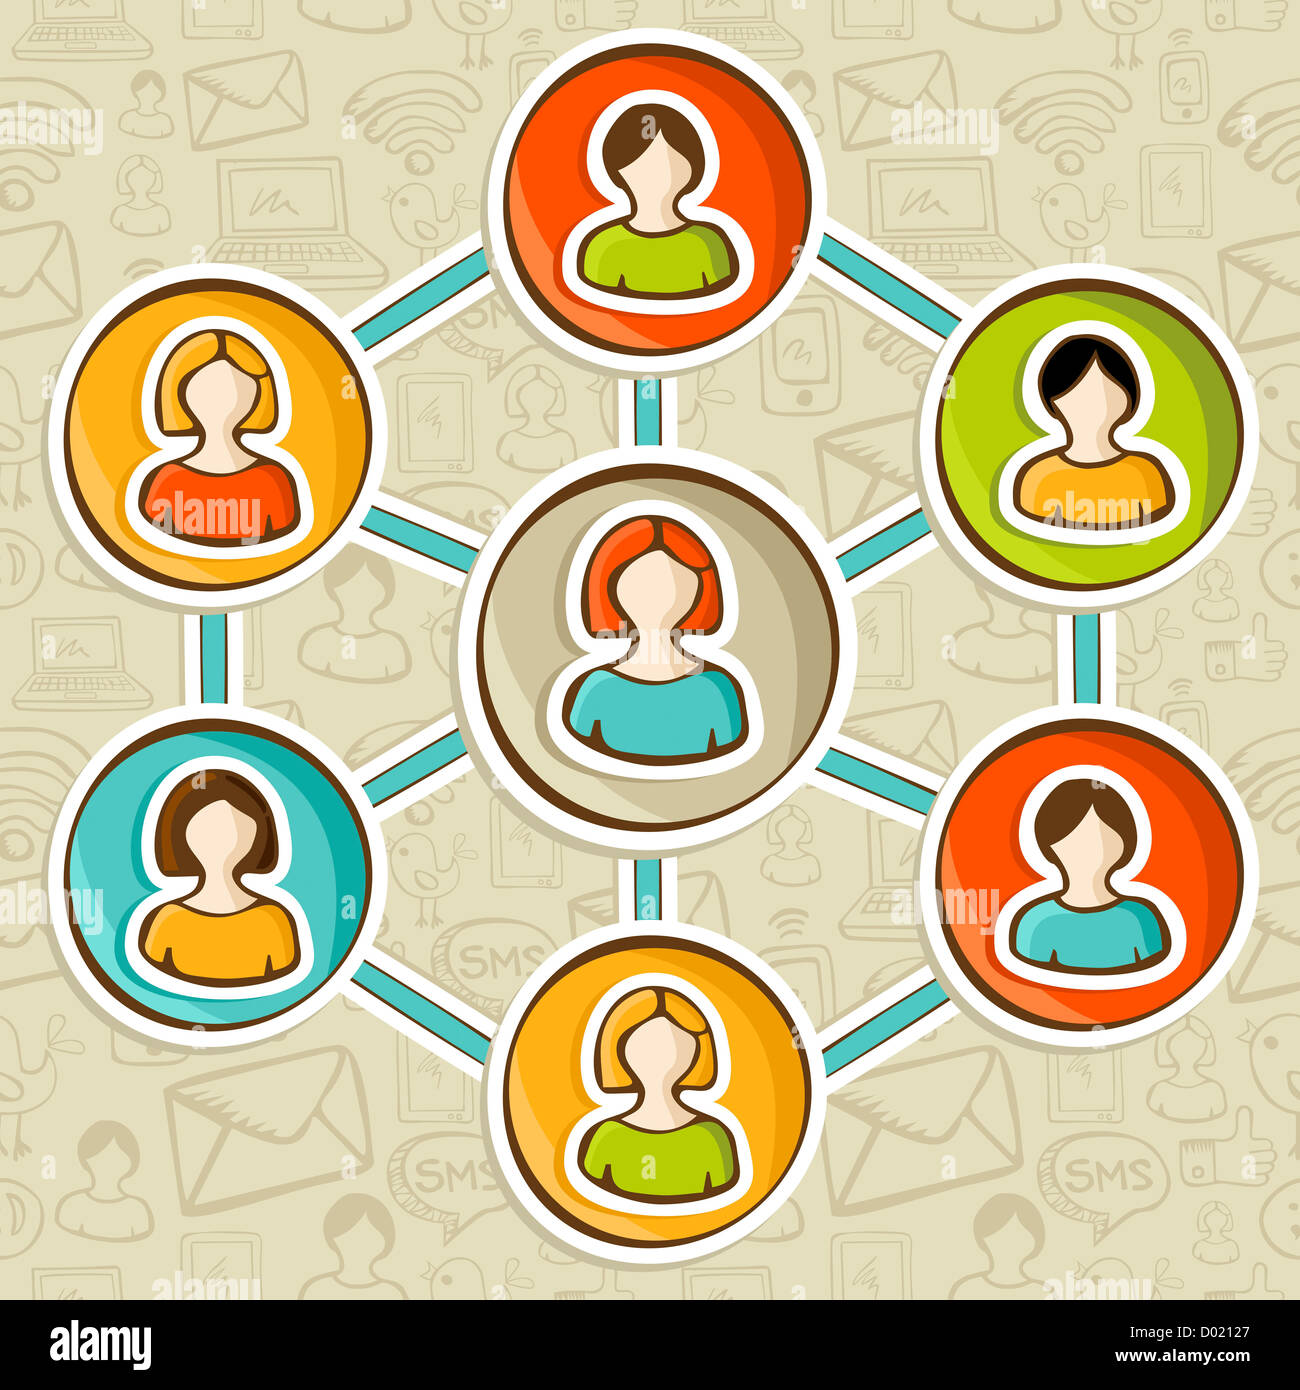 Social media networks web marketing connection diagram. Vector illustration layered for easy manipulation and custom coloring. Stock Photo